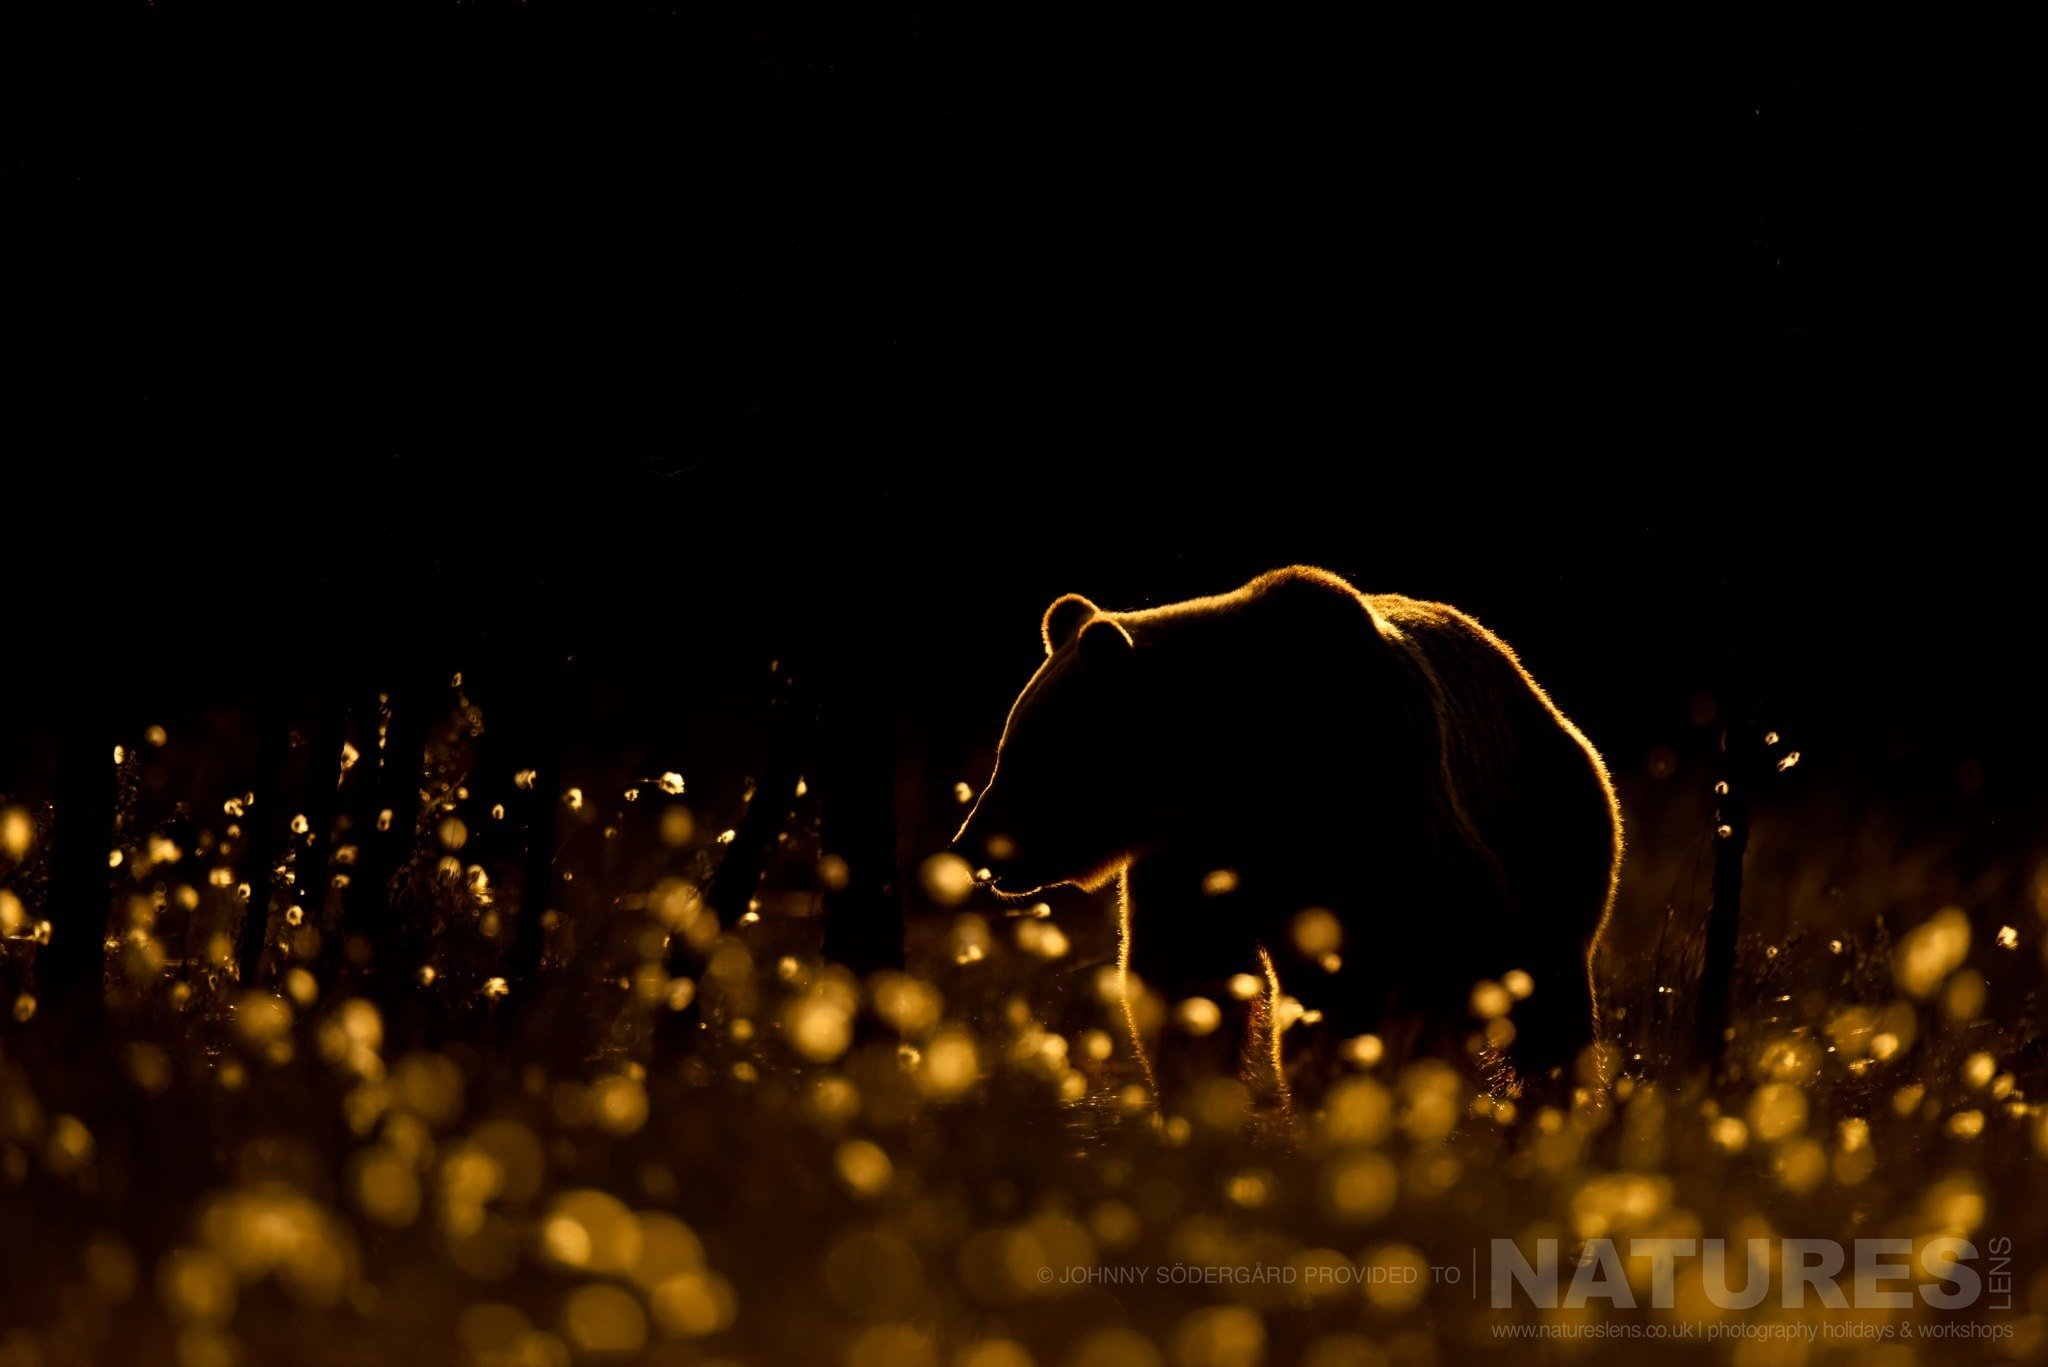 One Of The Large Bears Rim Lit In Golden Light Amongst The Cotton Grass Photographed By Johnny Södergård During The Natureslens Wild Brown Bears Of Finland Photography Holiday